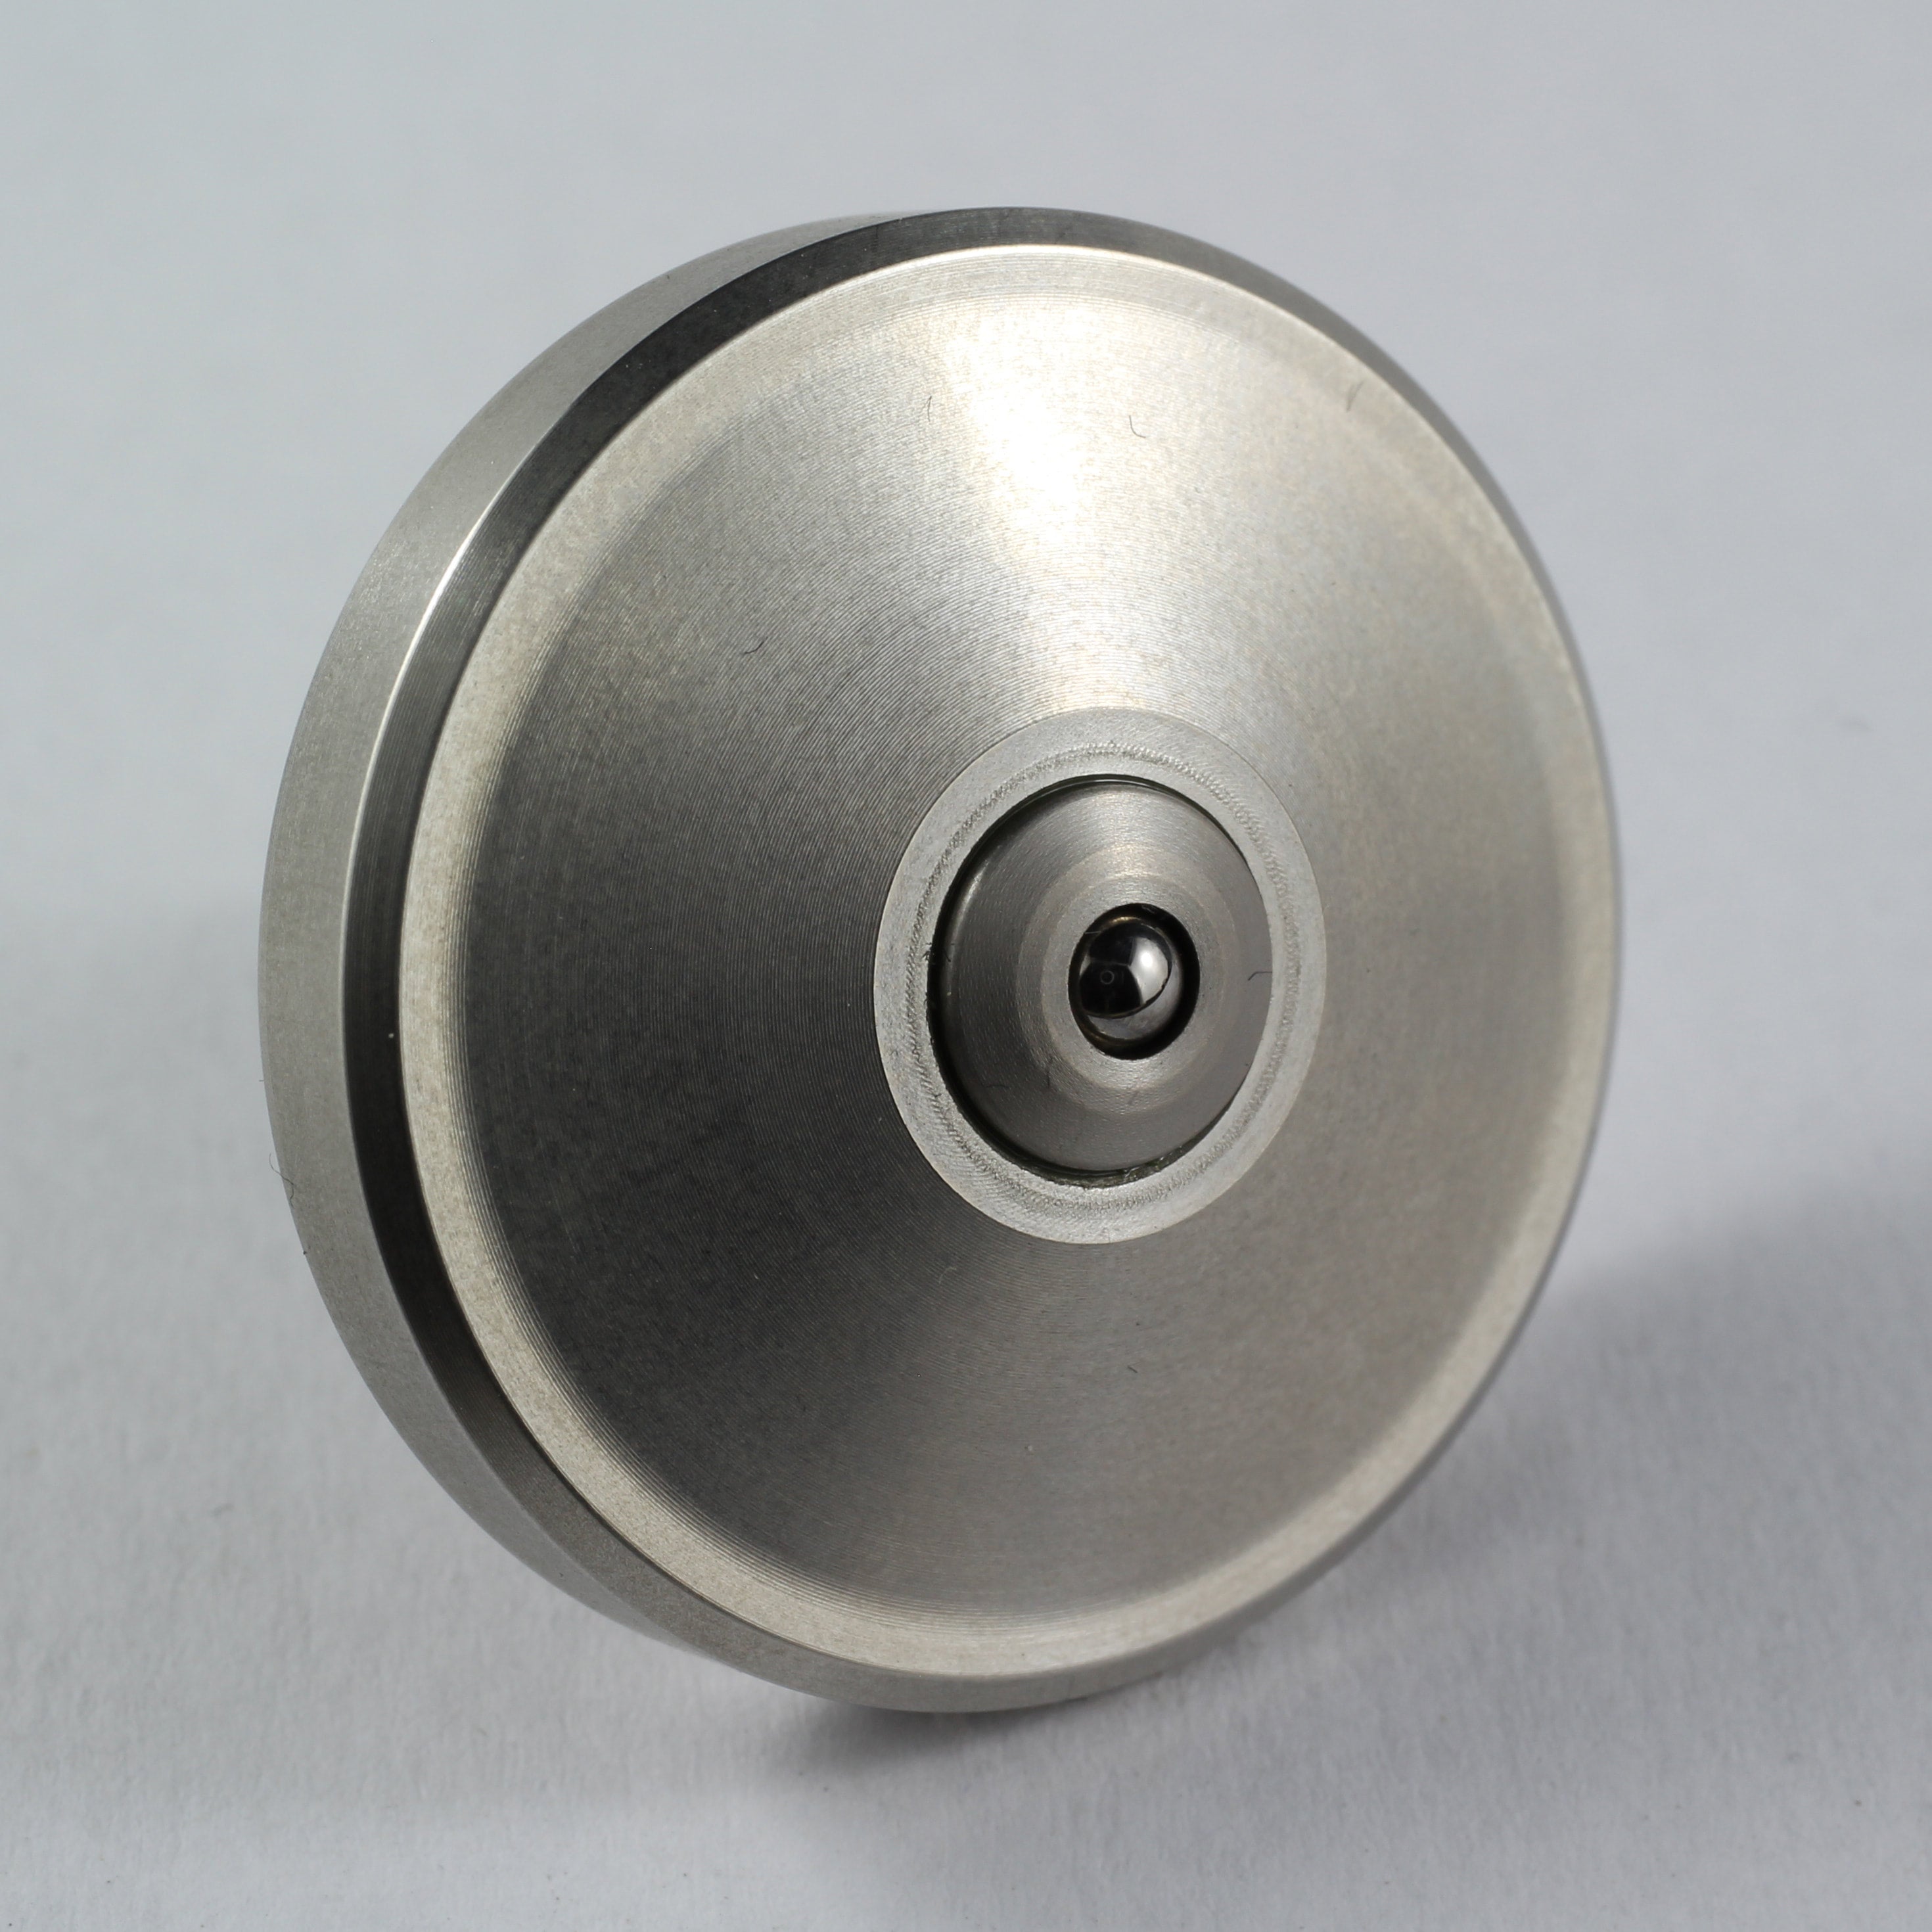 Spinoff stainless steel spinning top